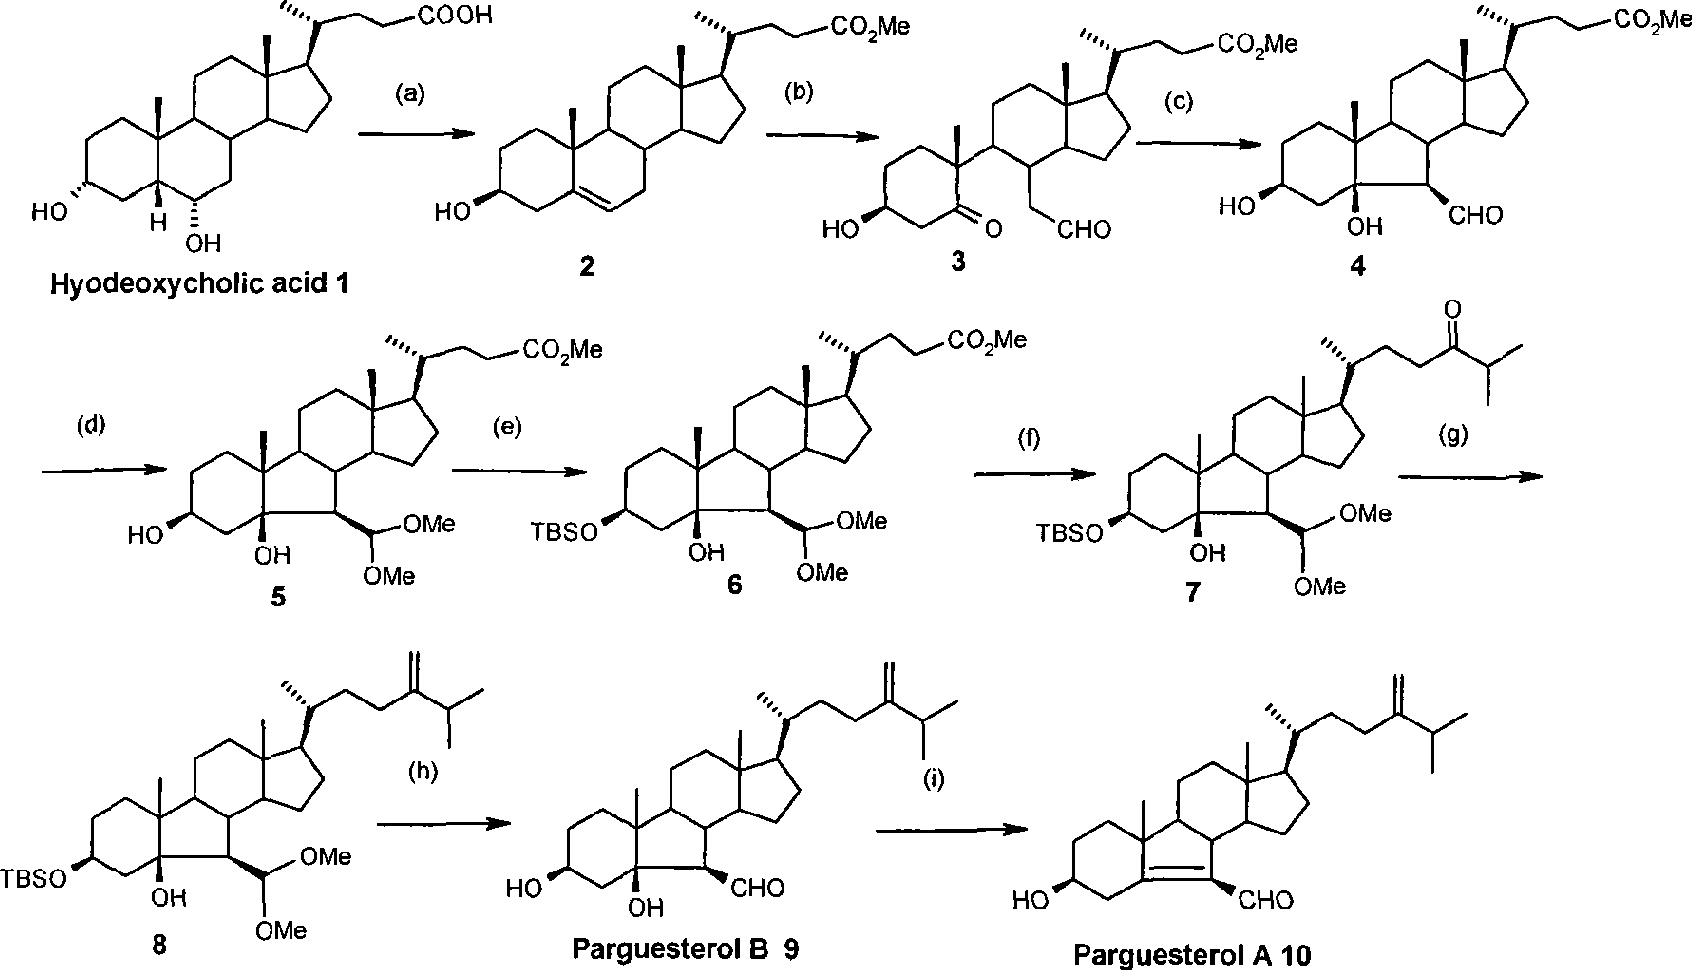 Synthesis of tuberculosis resistant compound of arguesterol